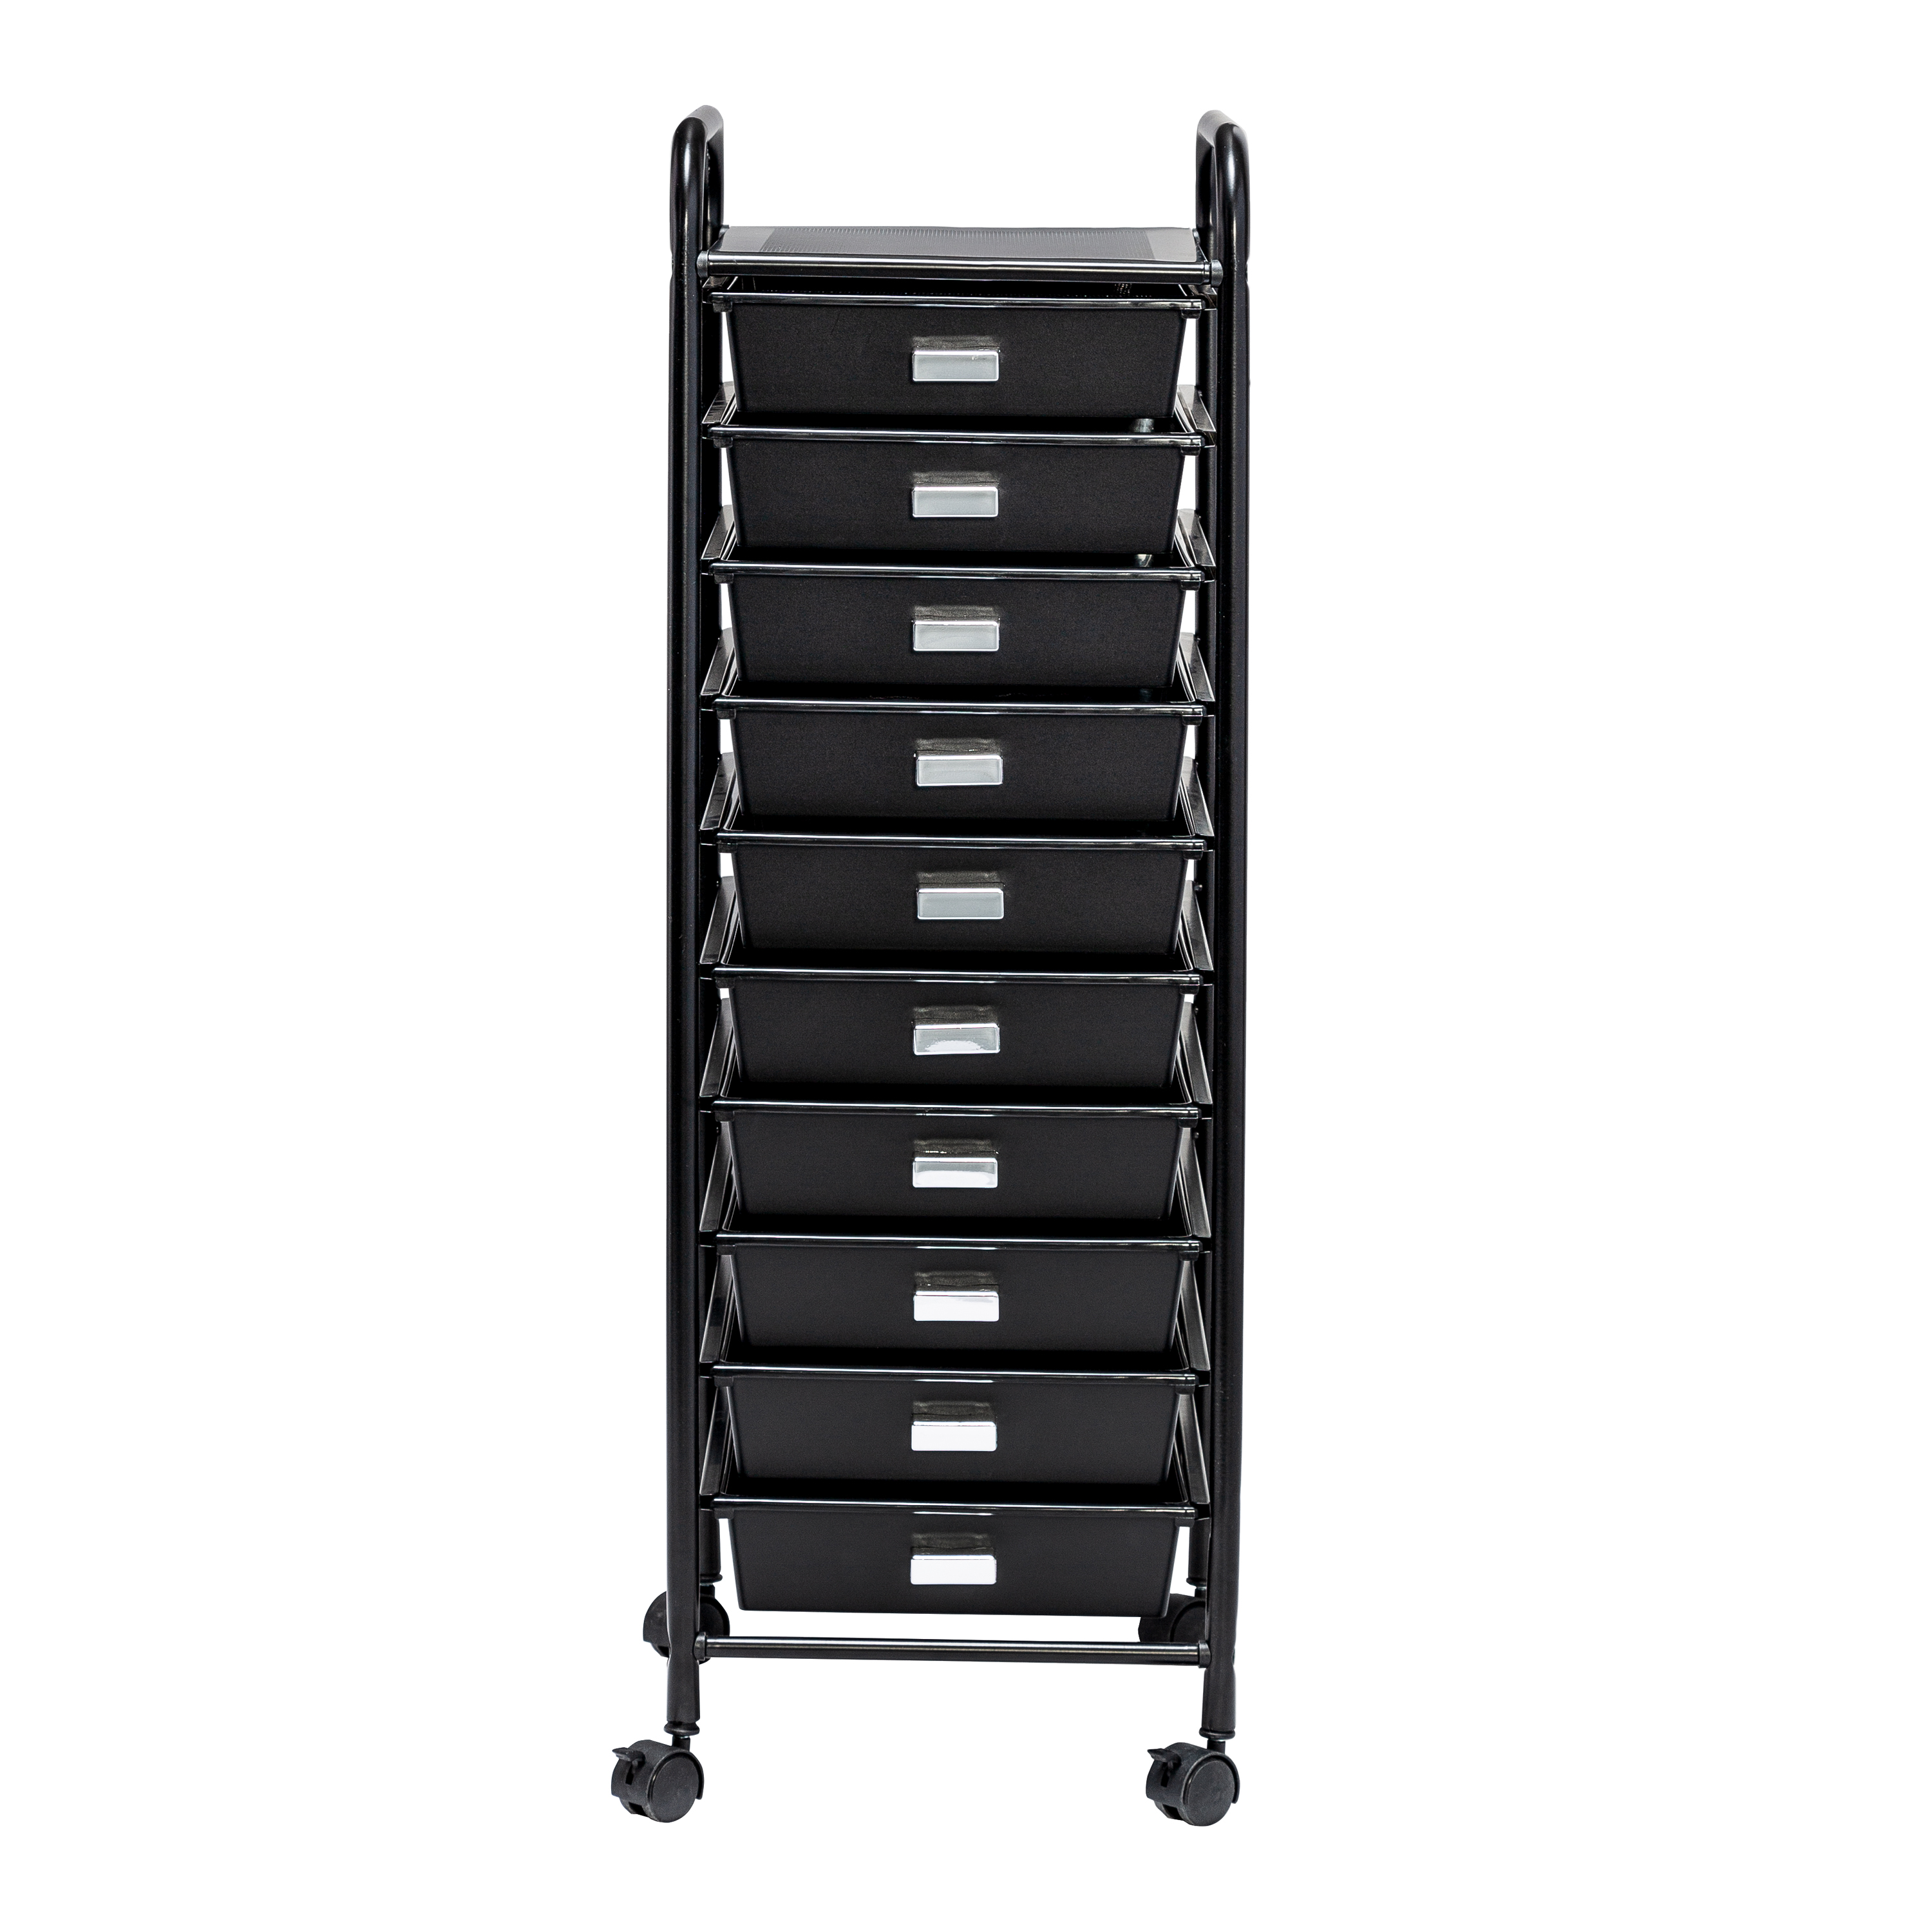 Honey-Can-Do Metal Frame Rolling Storage Cart with 10 Plastic Drawers, Black - image 5 of 9